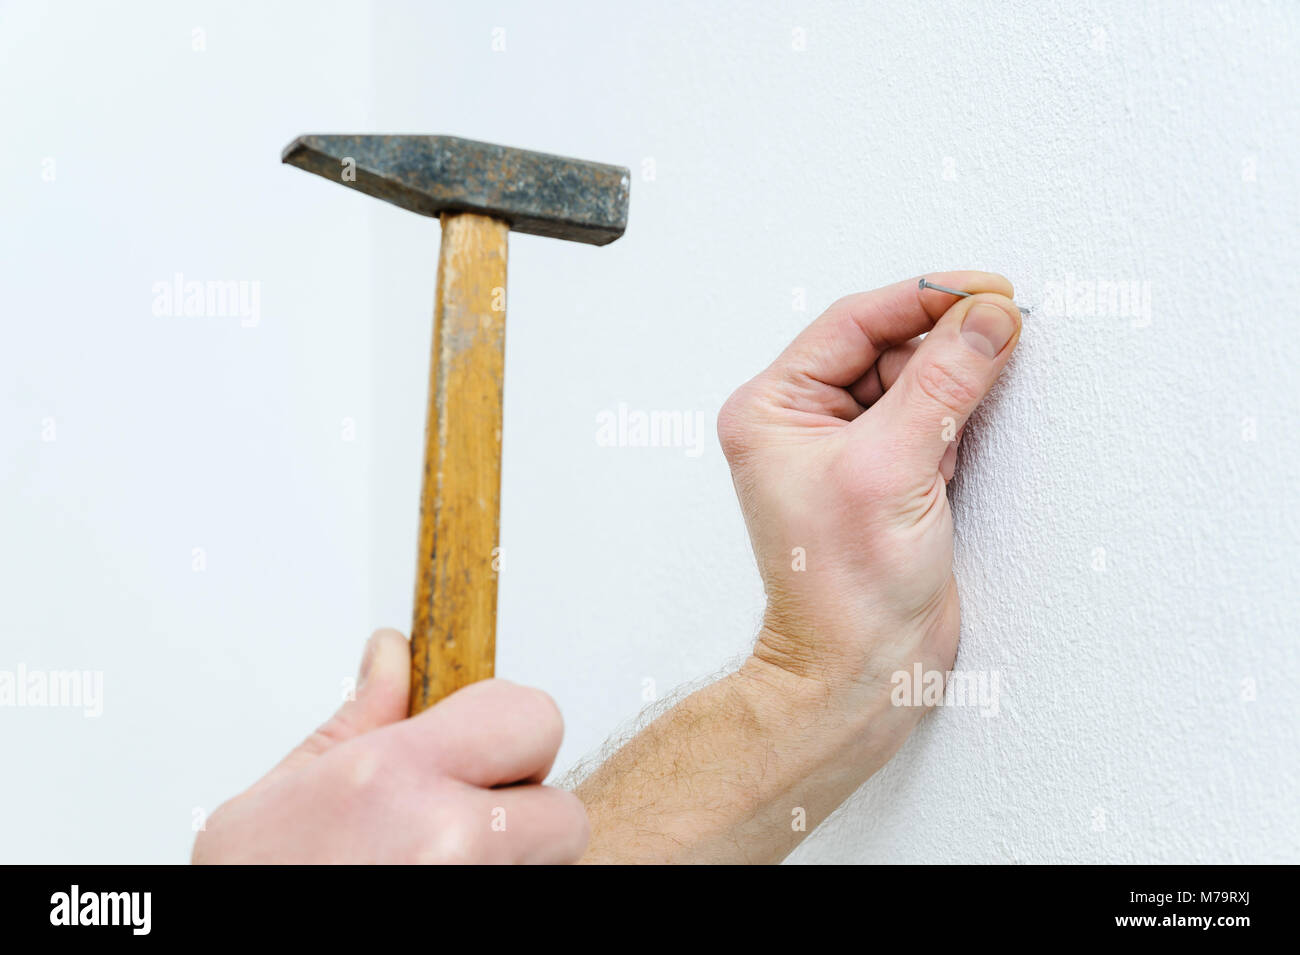 Man's hand is putting a nail into the wall to hang a picture. Stock Photo